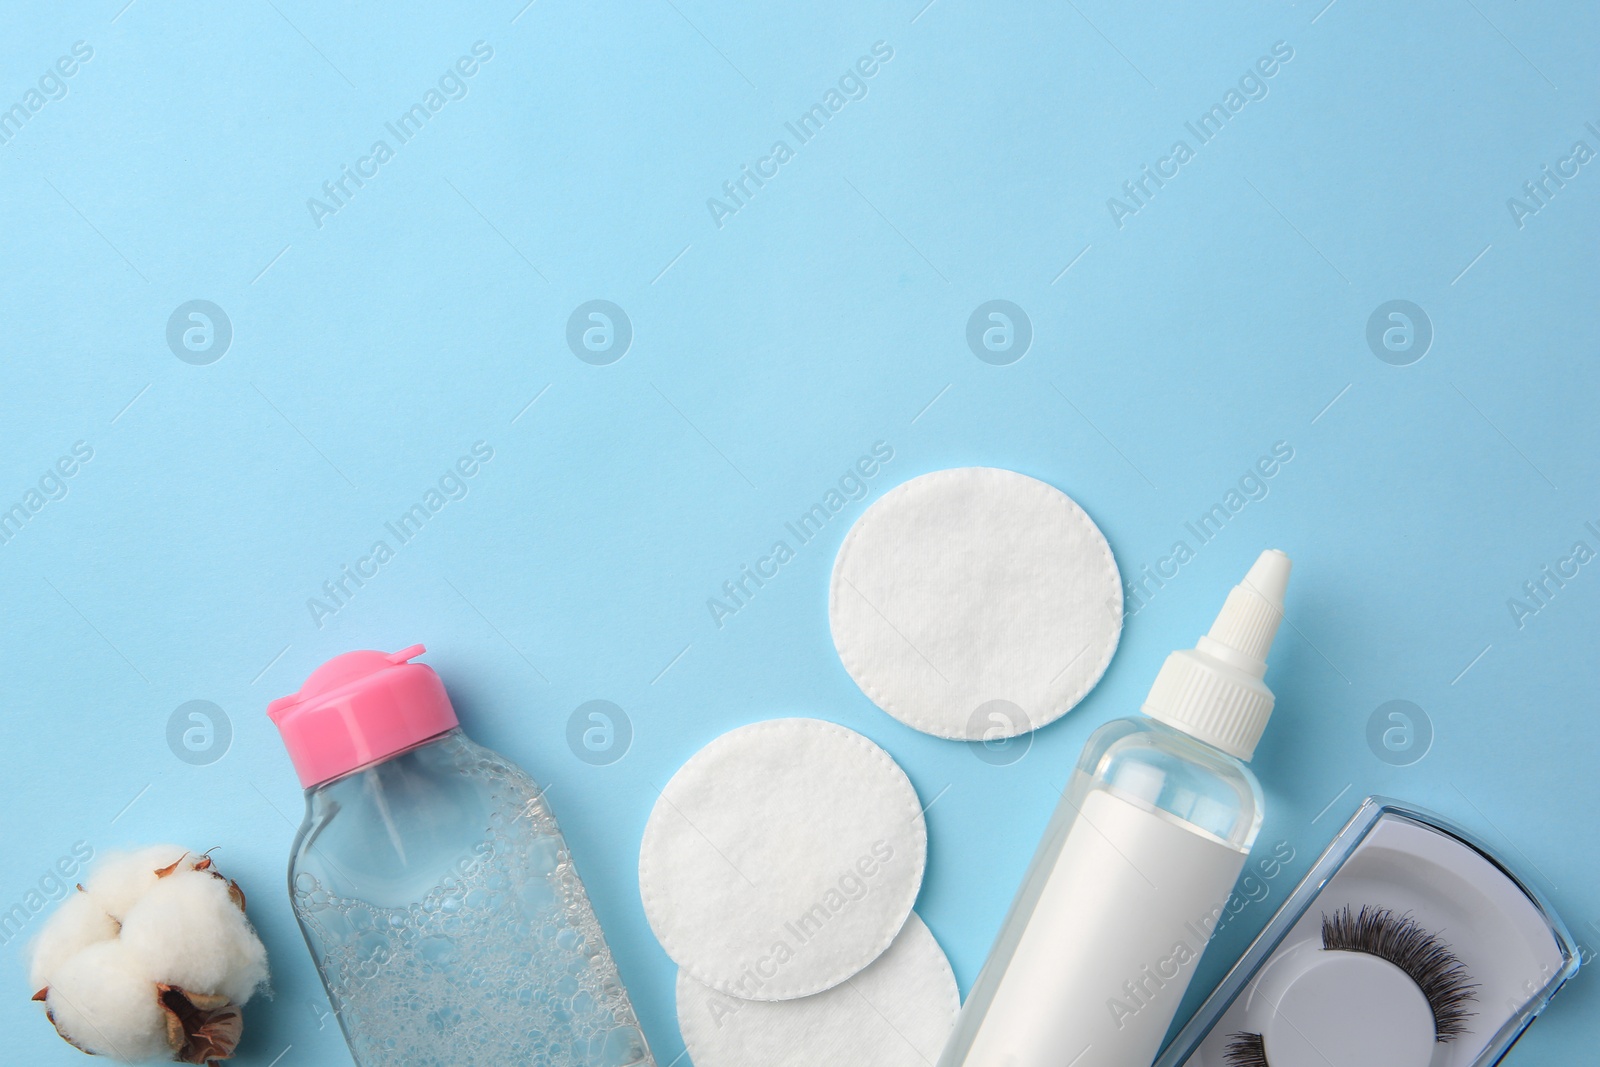 Photo of Bottles of makeup removers, cotton flower, pads and false eyelashes on light blue background, flat lay. Space for text